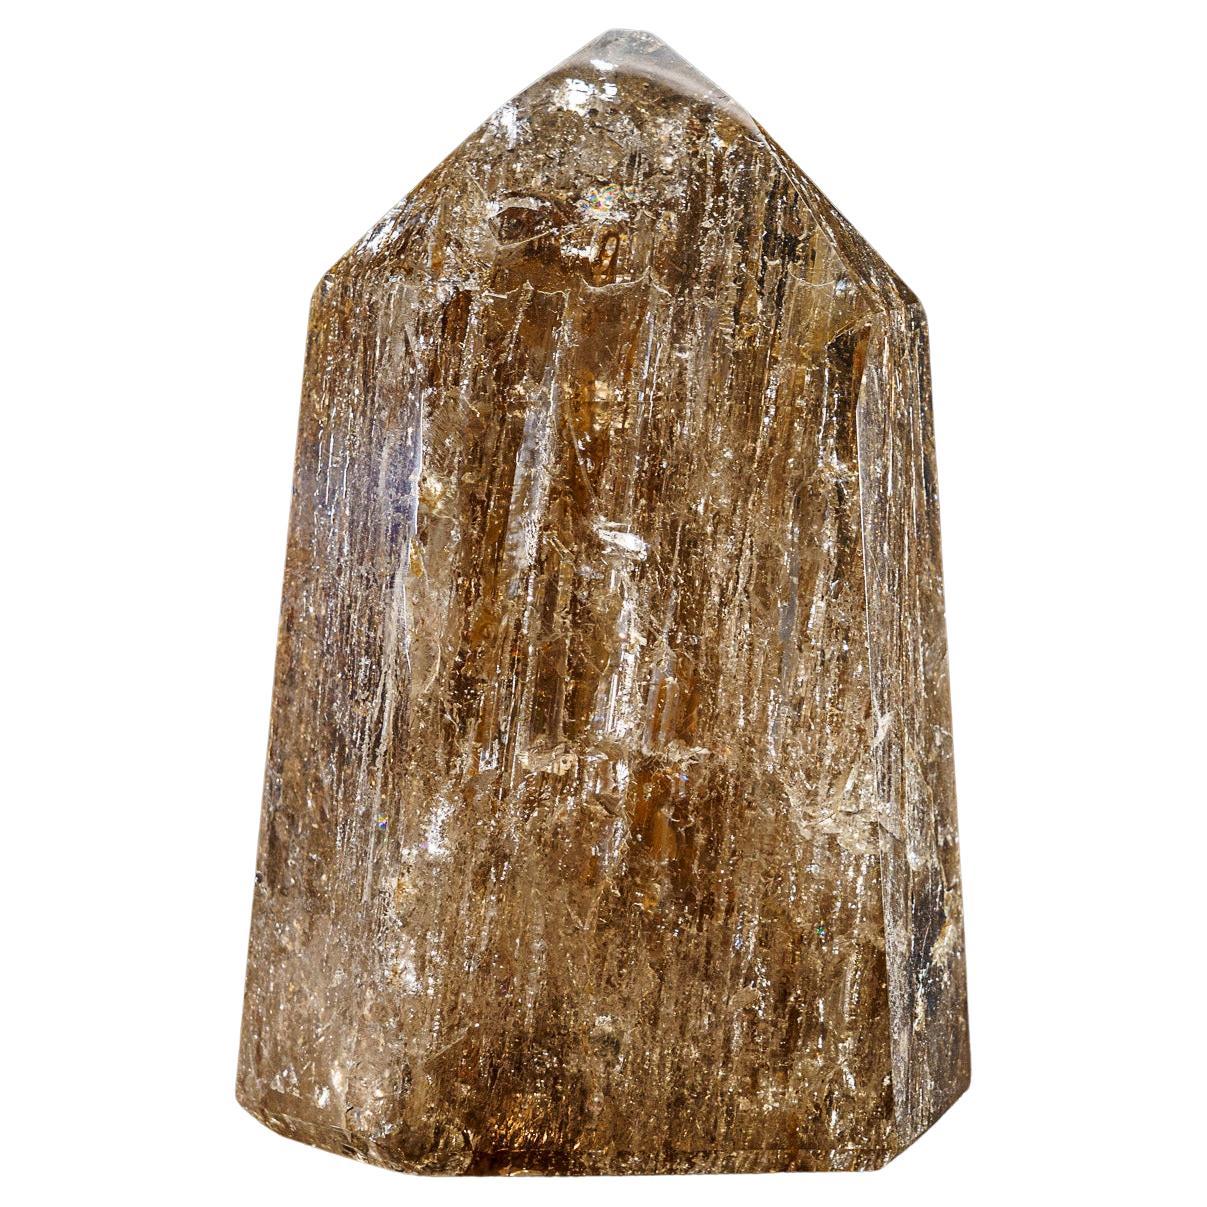 Genuine Large Smoky Quartz Point From Brazil (7.5 lbs) For Sale